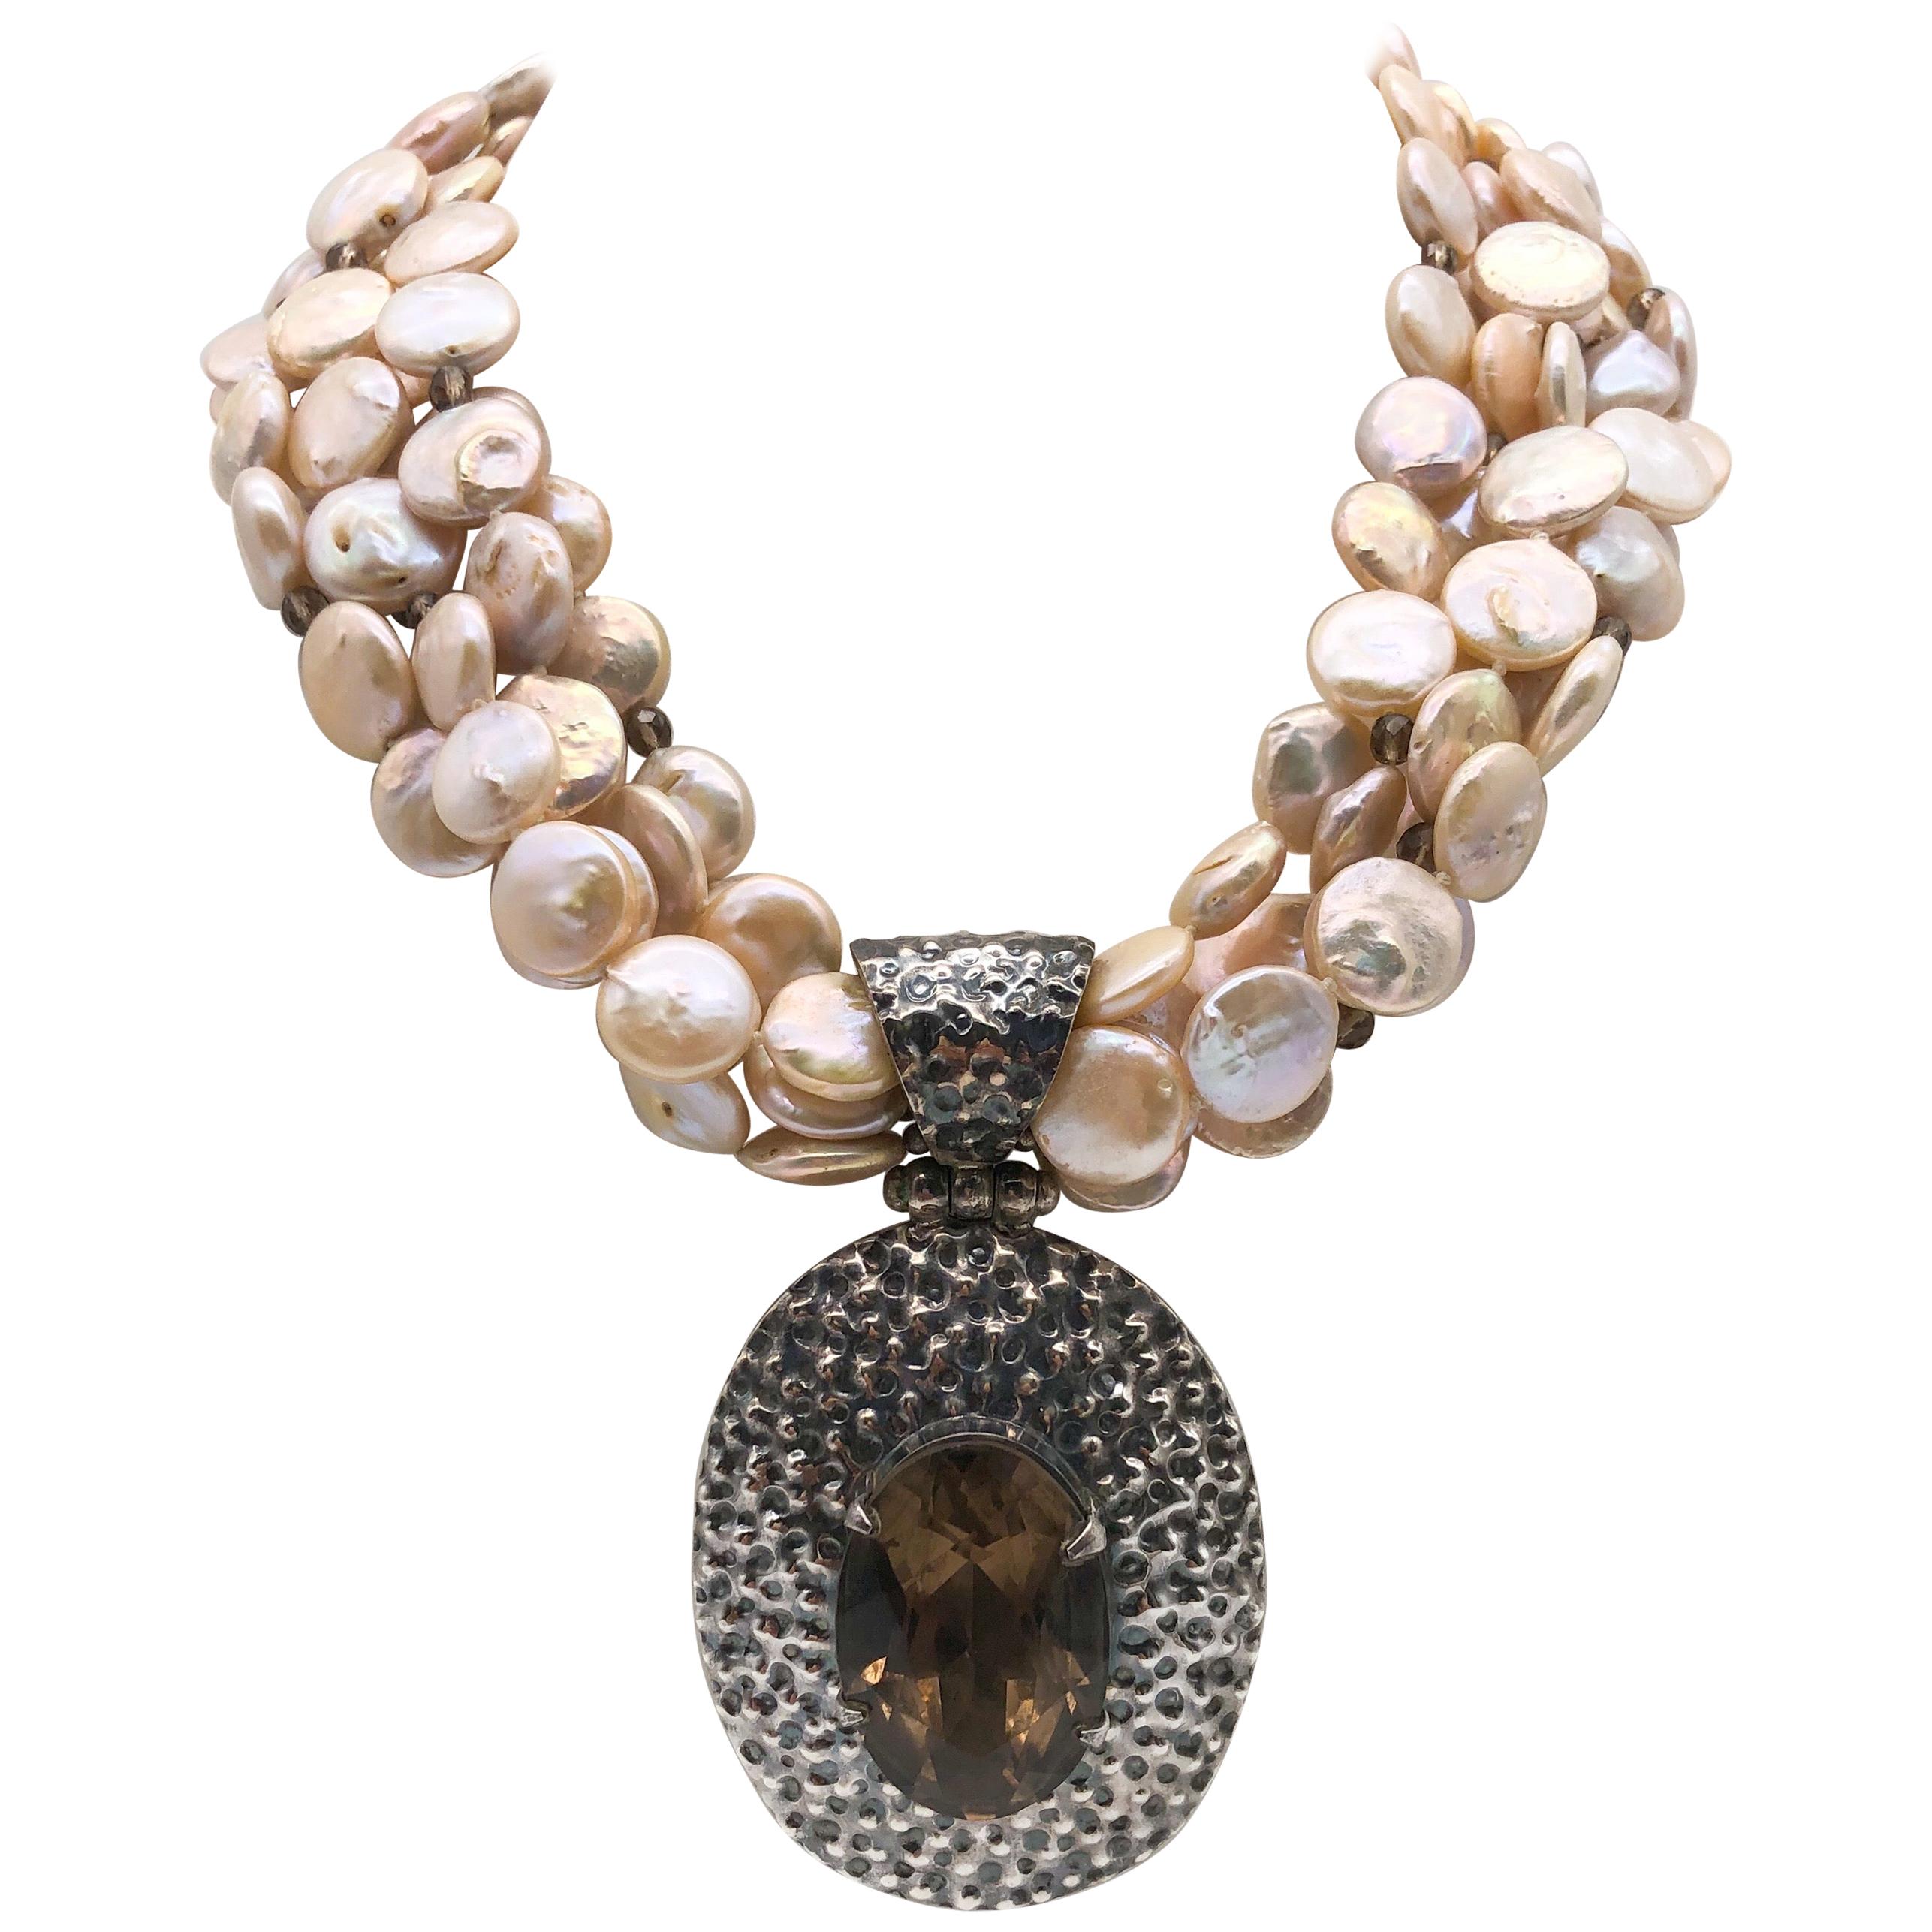 A.Jeschel 5 strand coin pearl necklace and Smokey Quartz necklace.